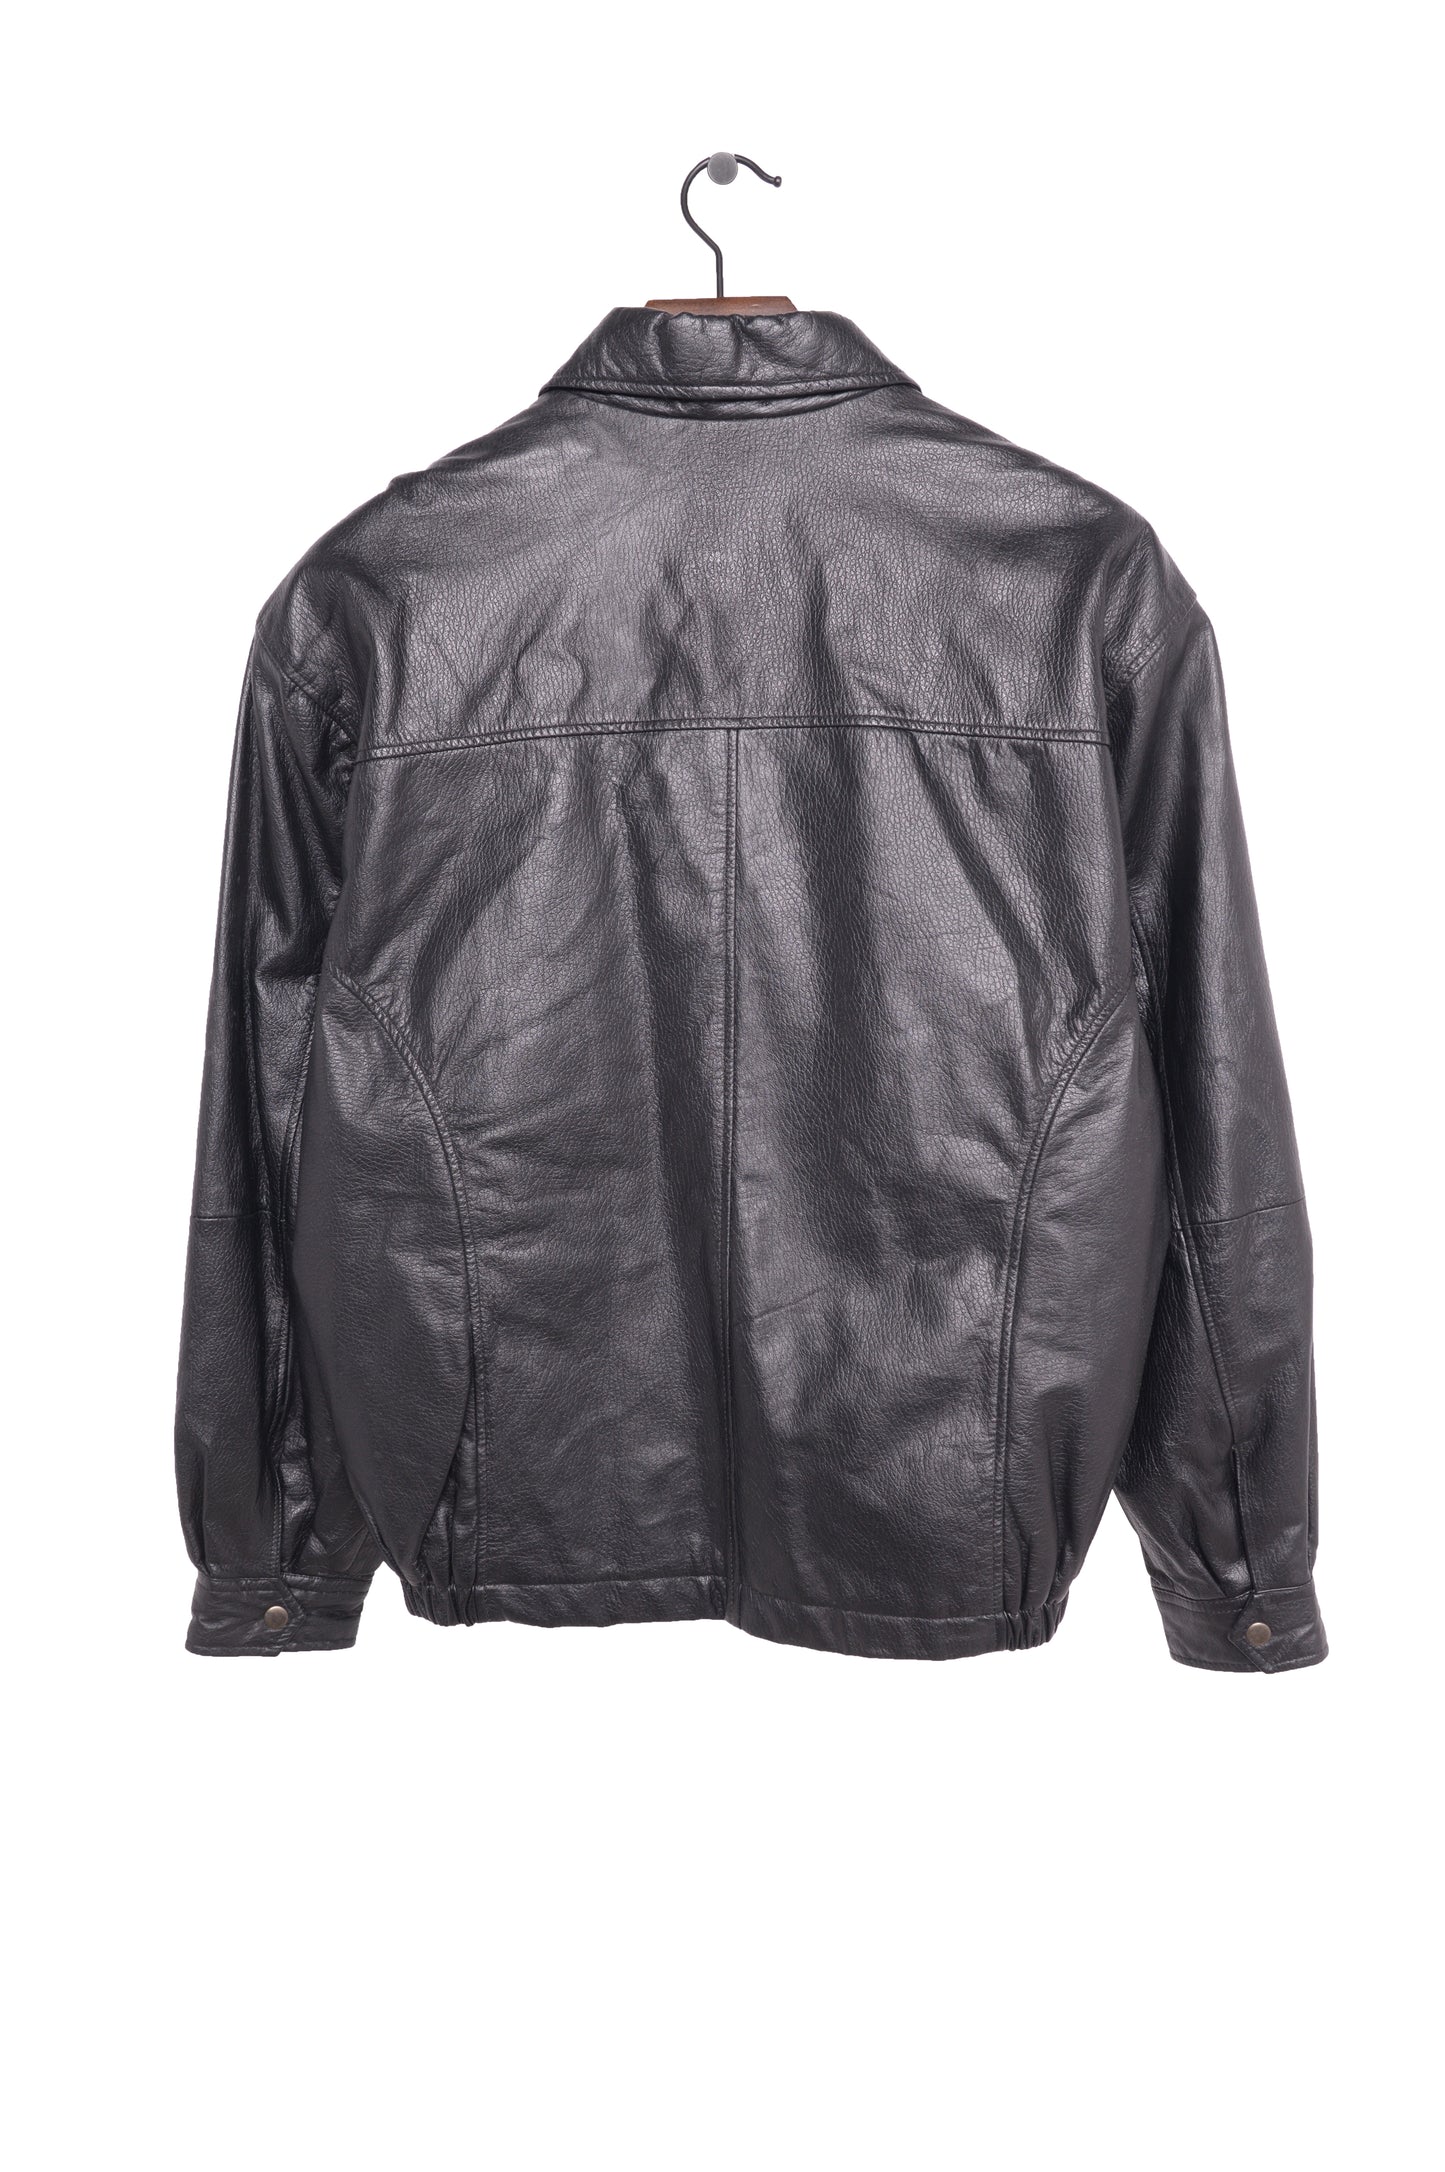 1990s Leather Bomber